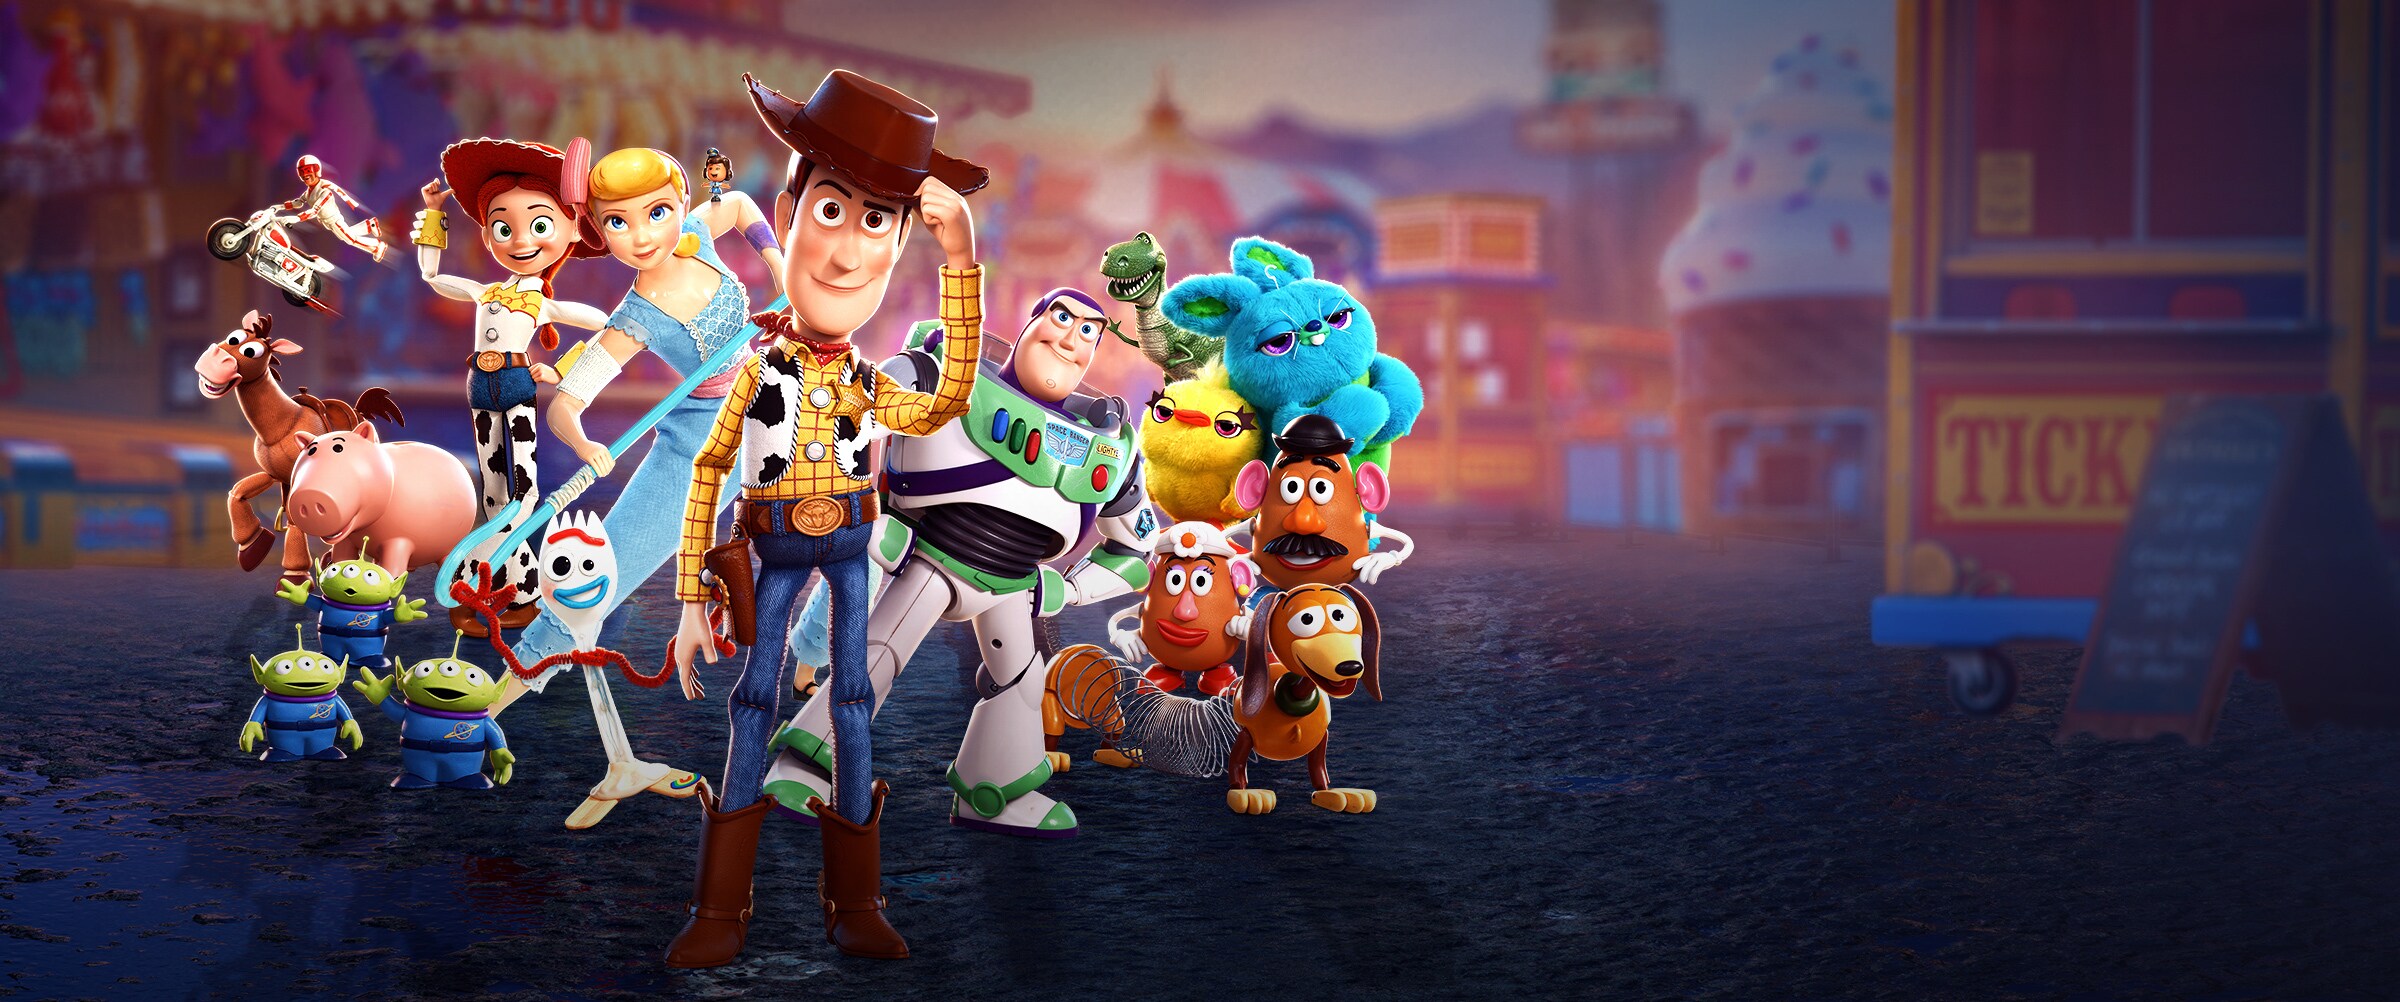 iOS 14 Home Screen Toy Story | Disney desktop wallpaper, Animated wallpaper  for pc, Toy story 3